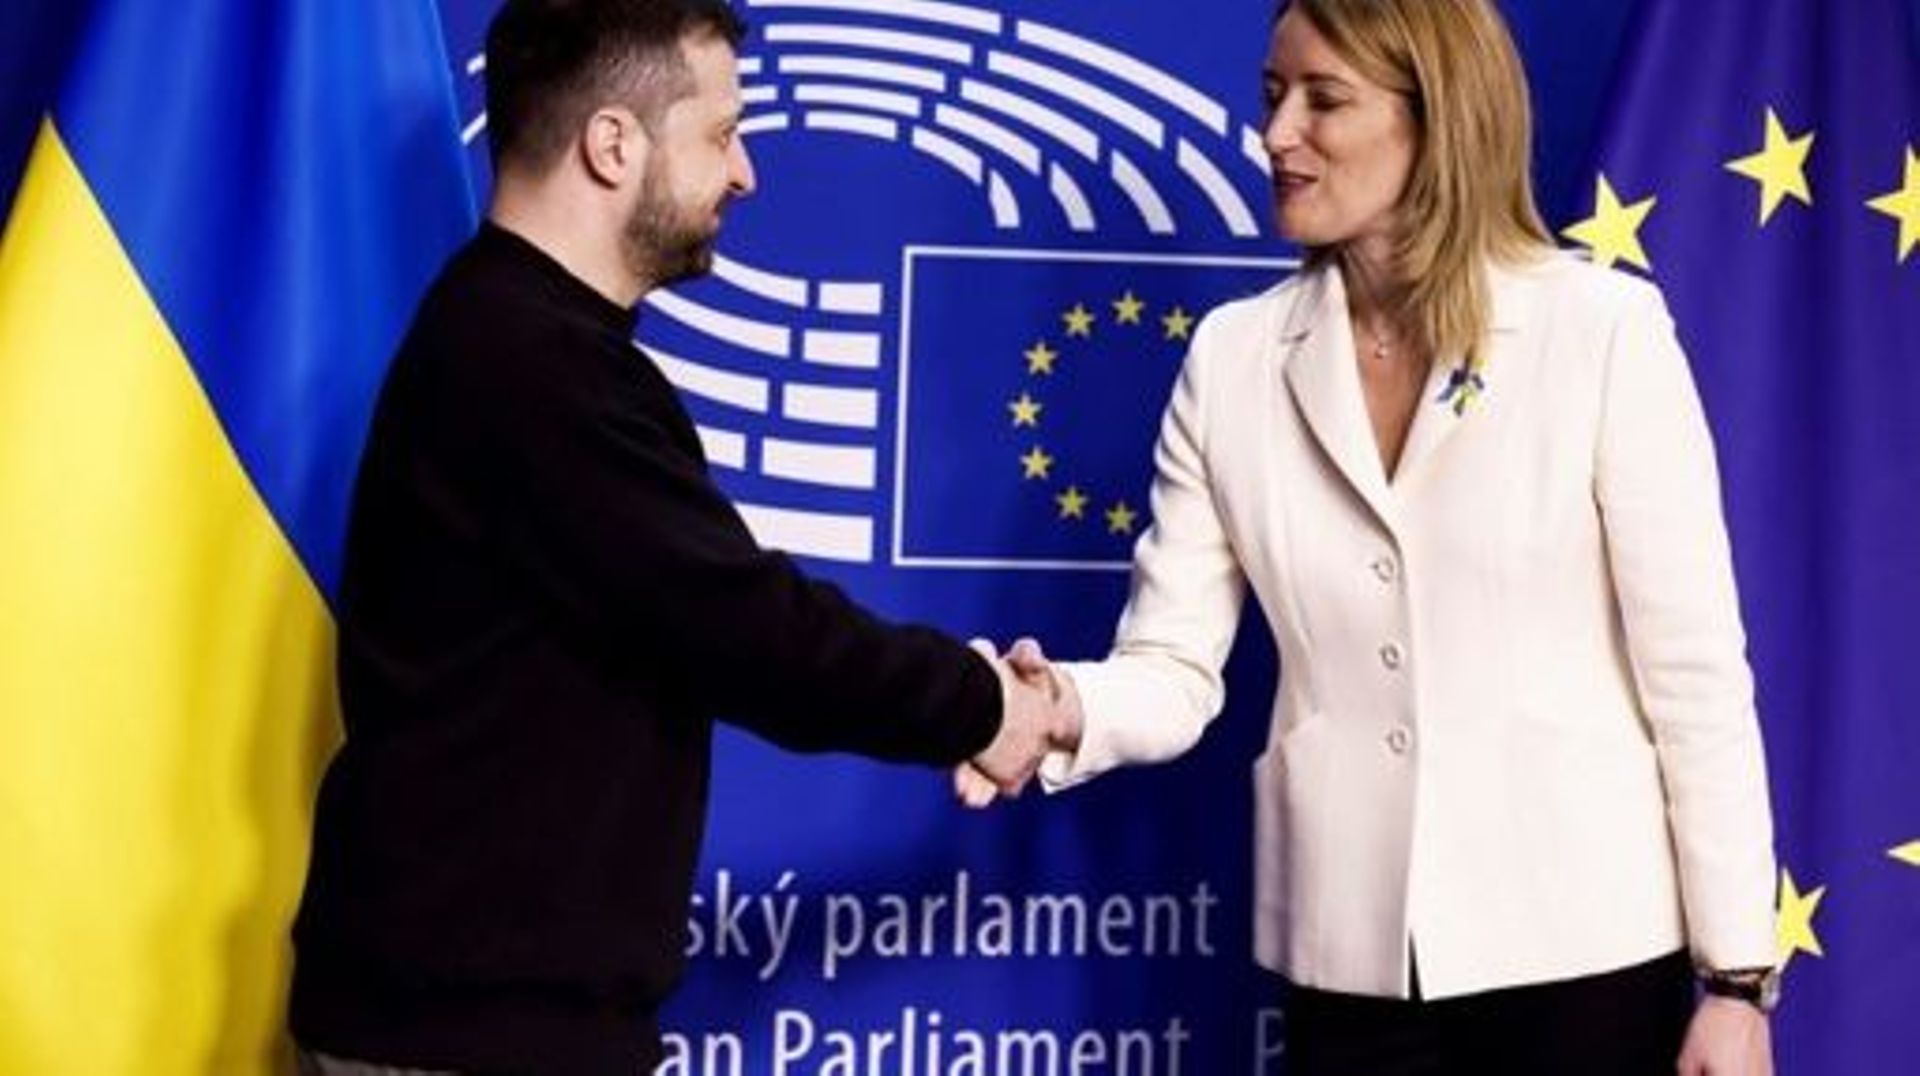 Ukraine's president Volodymyr Zelensky (L) shakes hands with European Parliament President Roberta Metsola as he arrives for a summit at EU parliament in Brussels, on February 9, 2023. Ukraine's President is set to attend an EU summit in Brussels on Febru